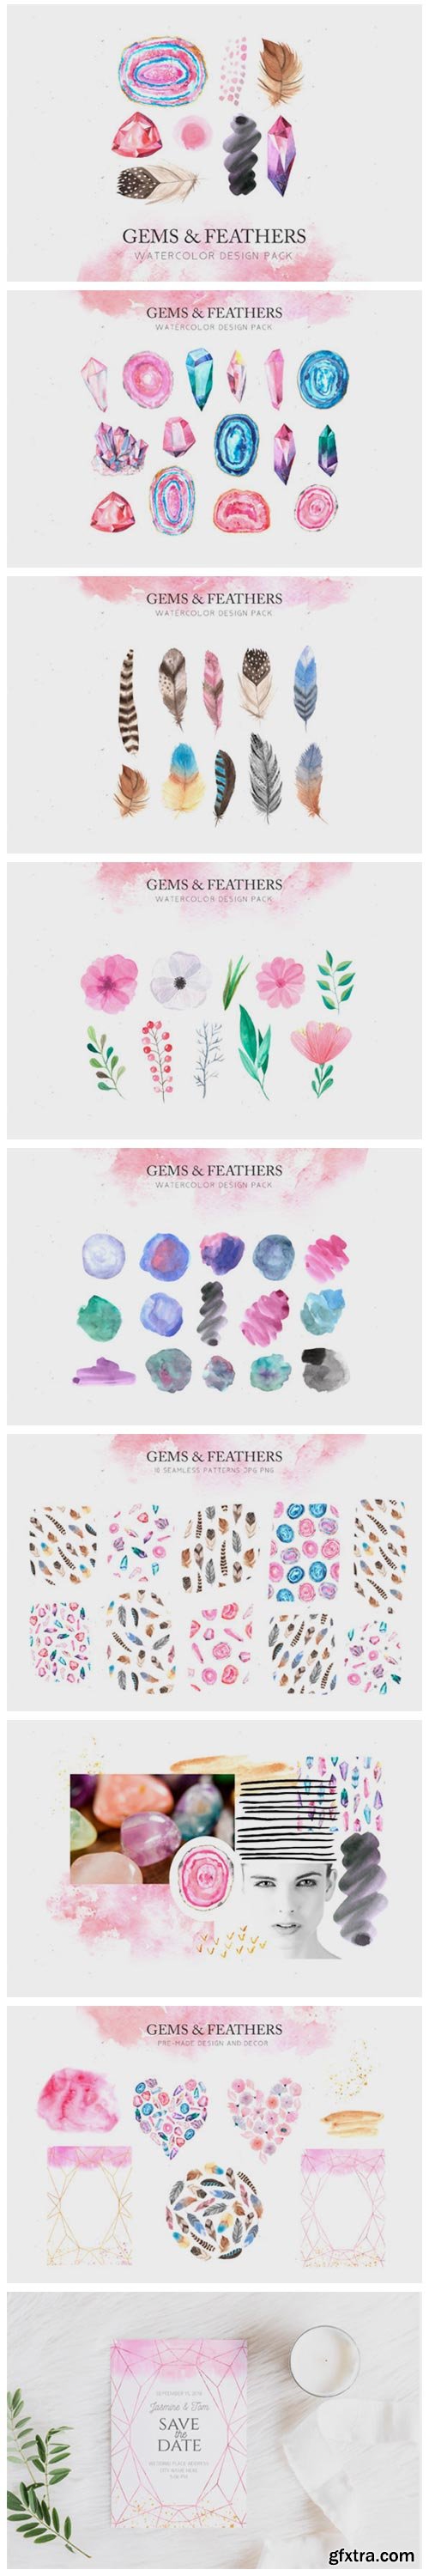 Watercolor Gems & Feathers Set 3669821